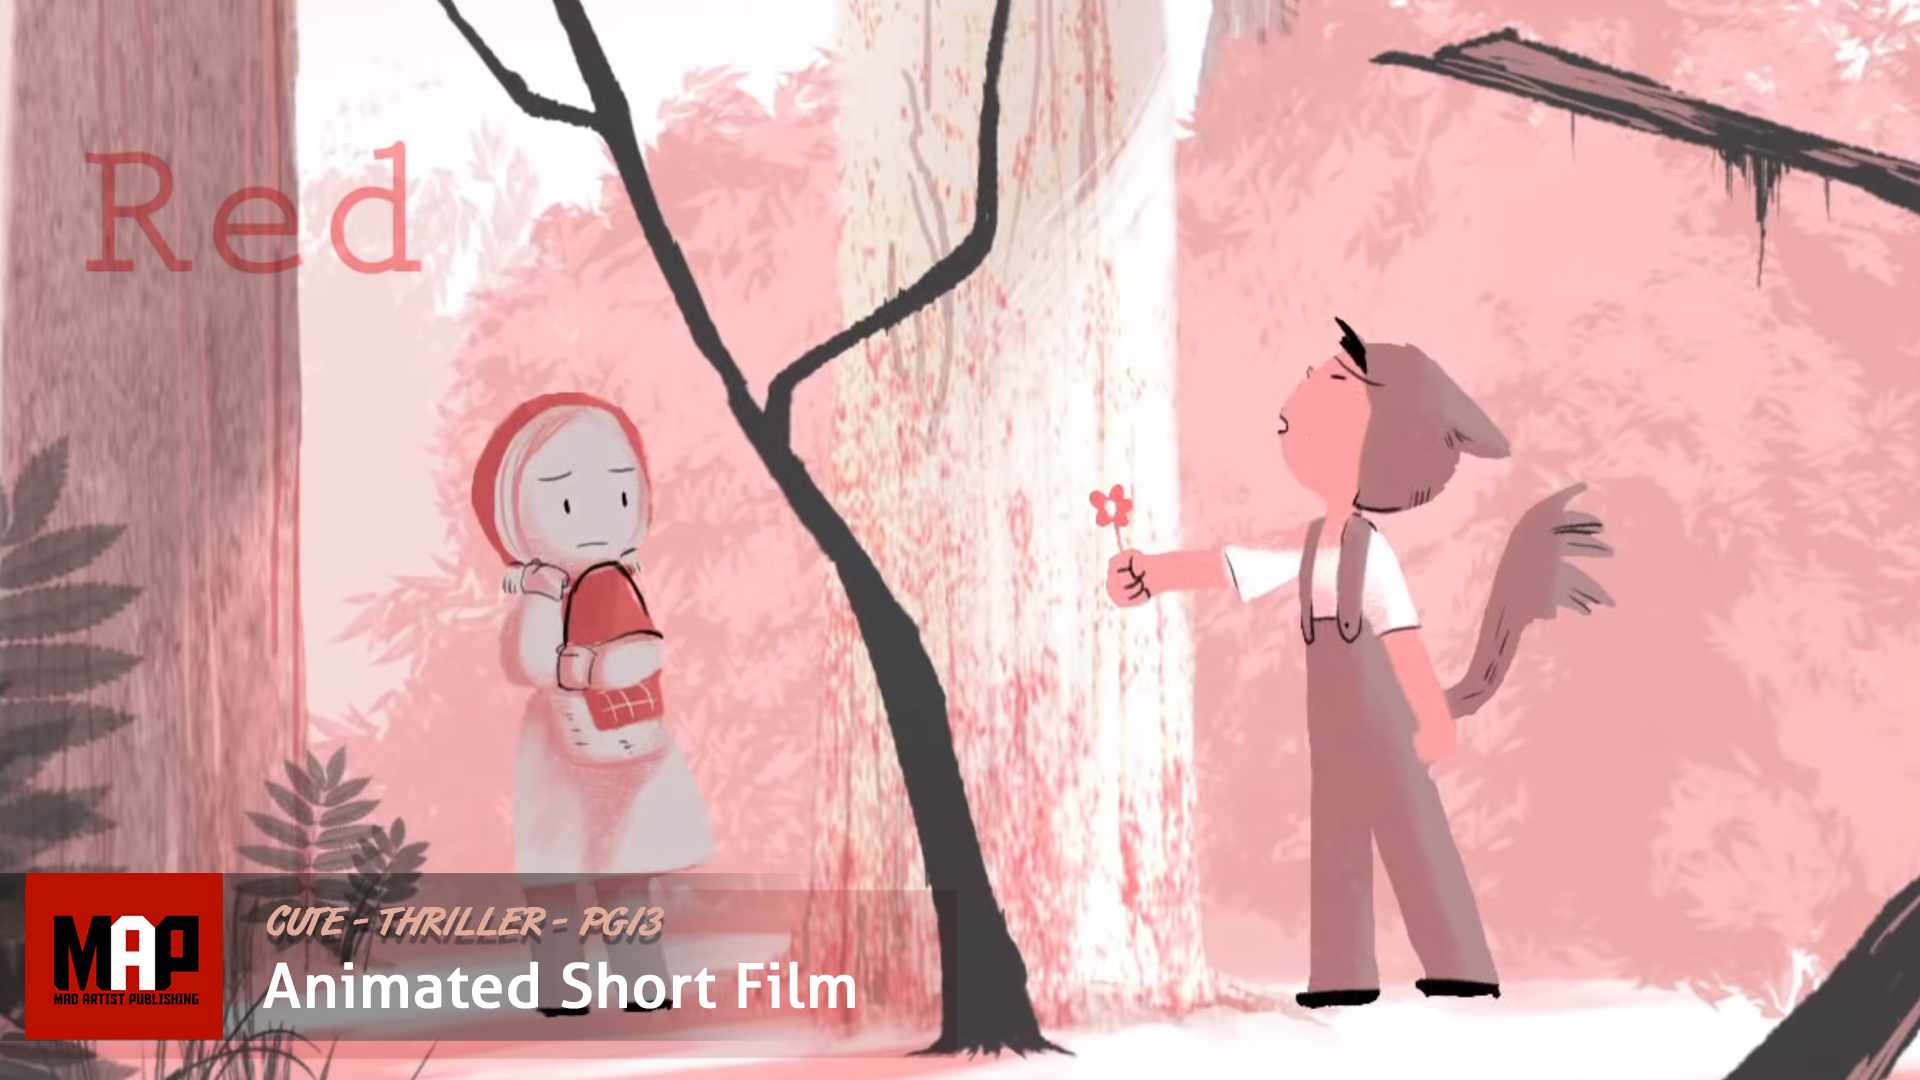 Cute Romantic Animated Thriller ** RED ** Short Film Animation by Hyunjoo Song & CalArts Institute